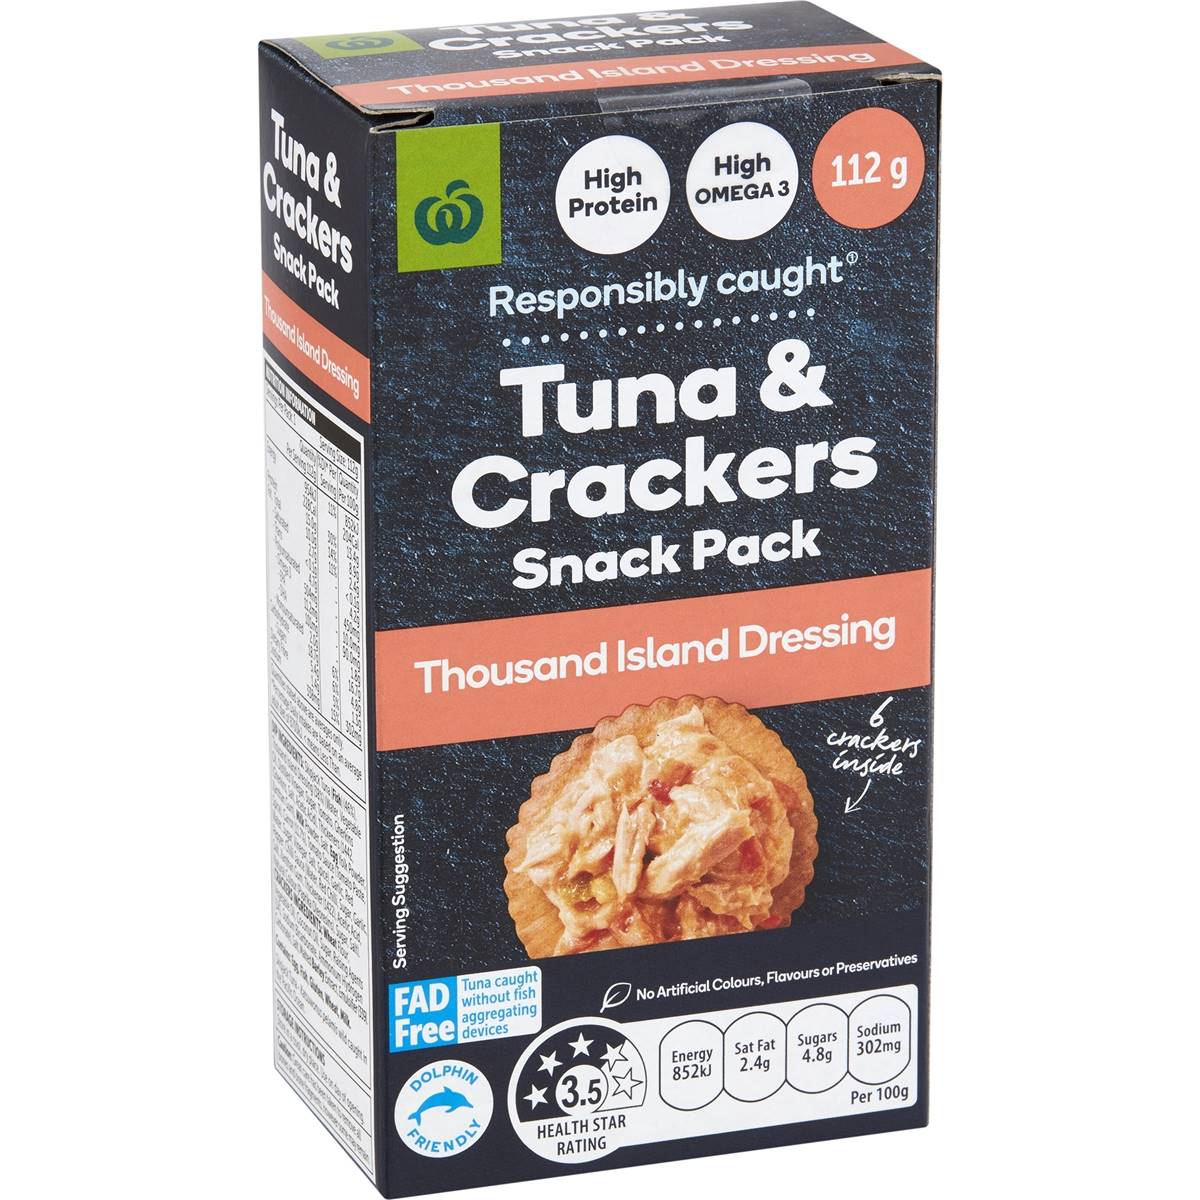 Calories in Woolworths Tuna & Crackers Snack Pack Thousand Island